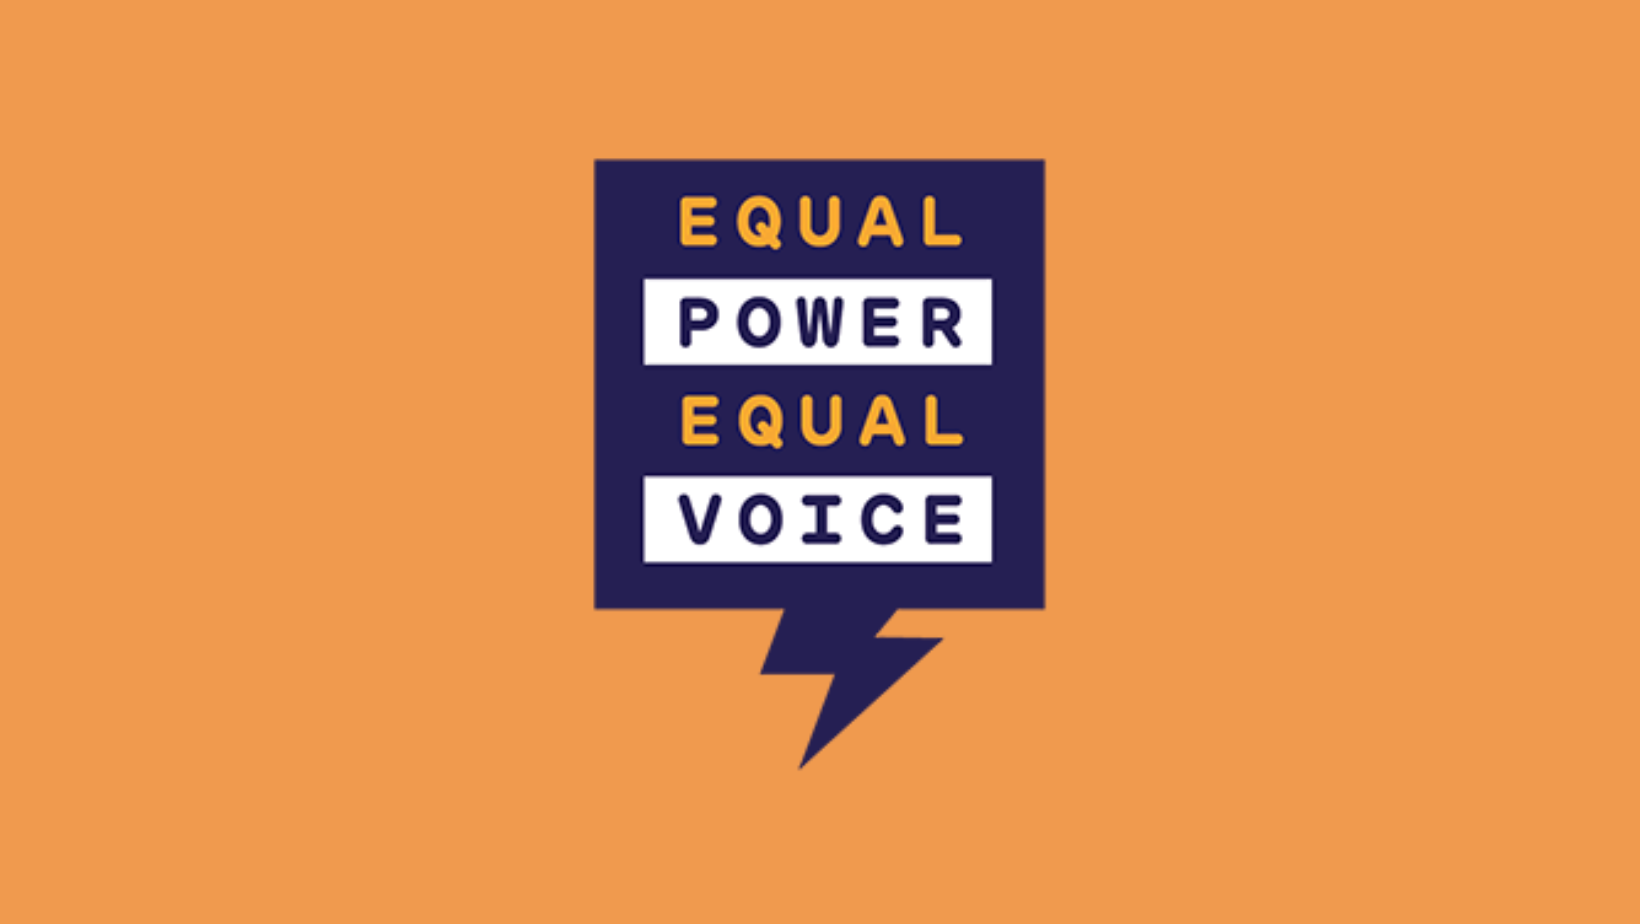 On an orange background, the project title 'Equal Power Equal Voice' is written in orange text in a purple square box which has a lightning bolt shape at the bottom.